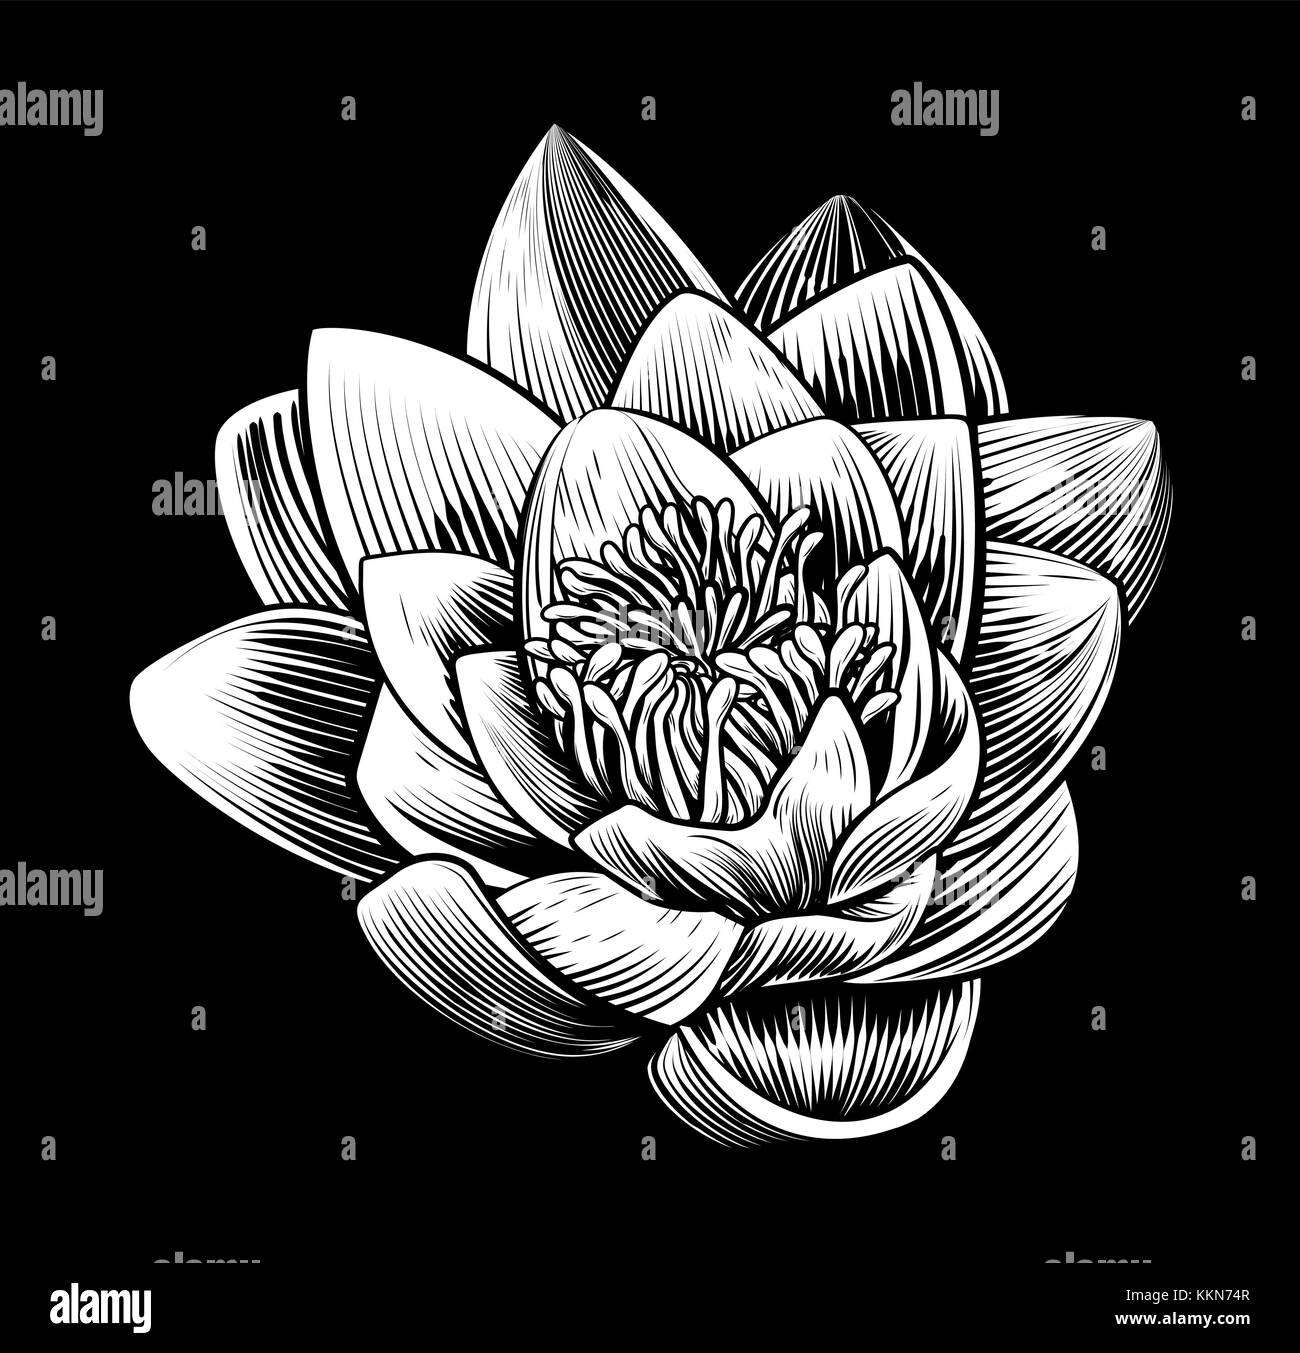 Water Lily Lotus Flower Vintage Style Woodcut Stock Vector